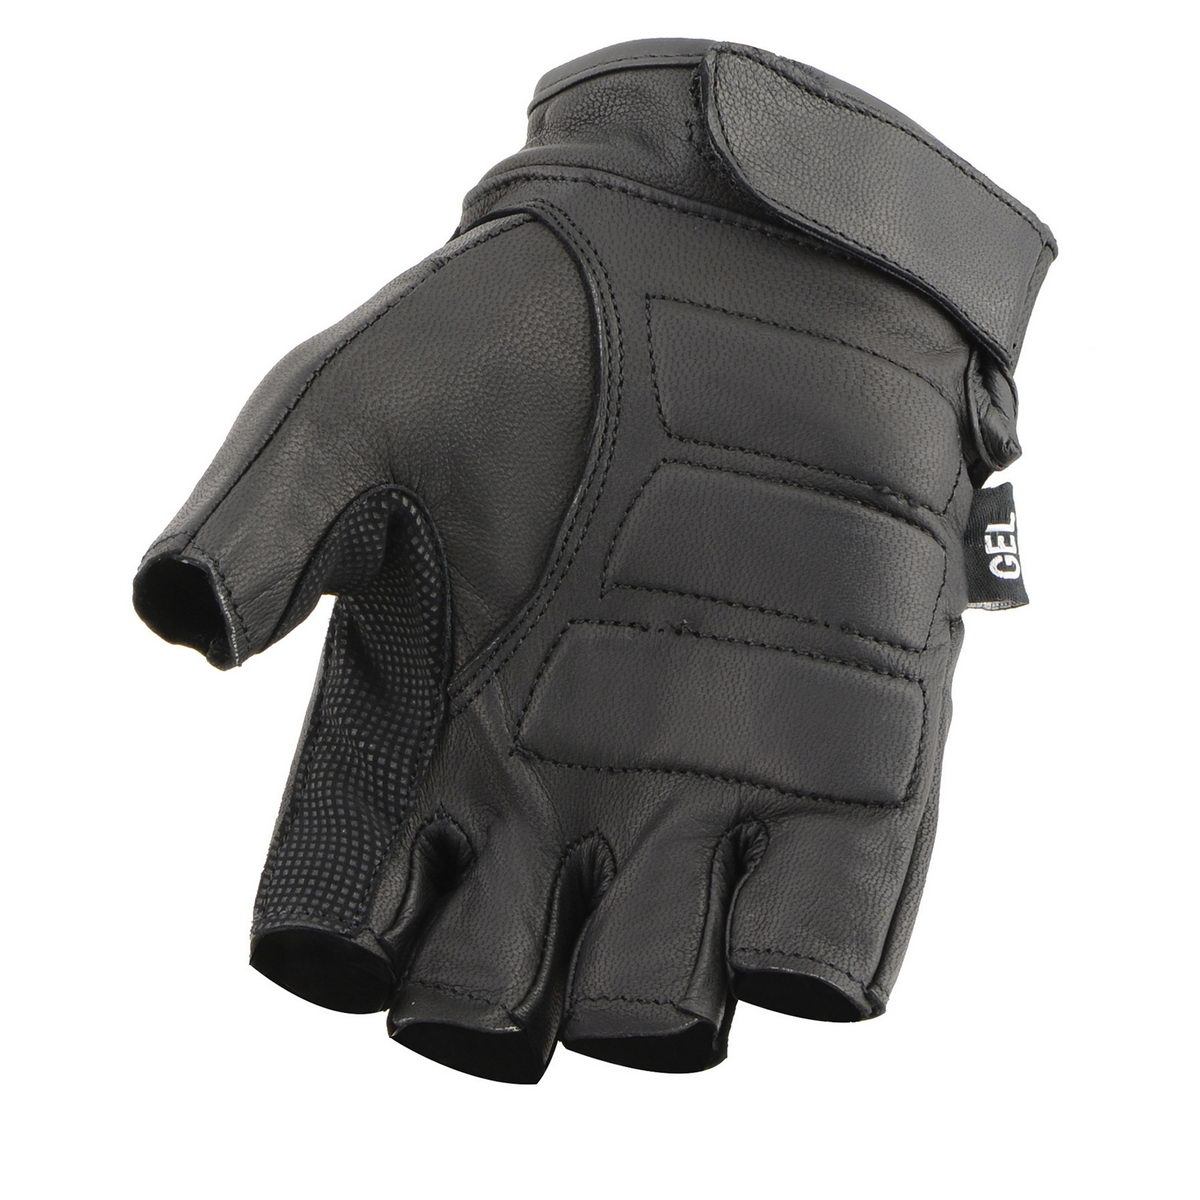 Milwaukee Leather SH462 Men's Black Leather Gel Palm Fingerless Motorcycle Hand Gloves W/ Soft and Stylish ‘Knuckle Pads’